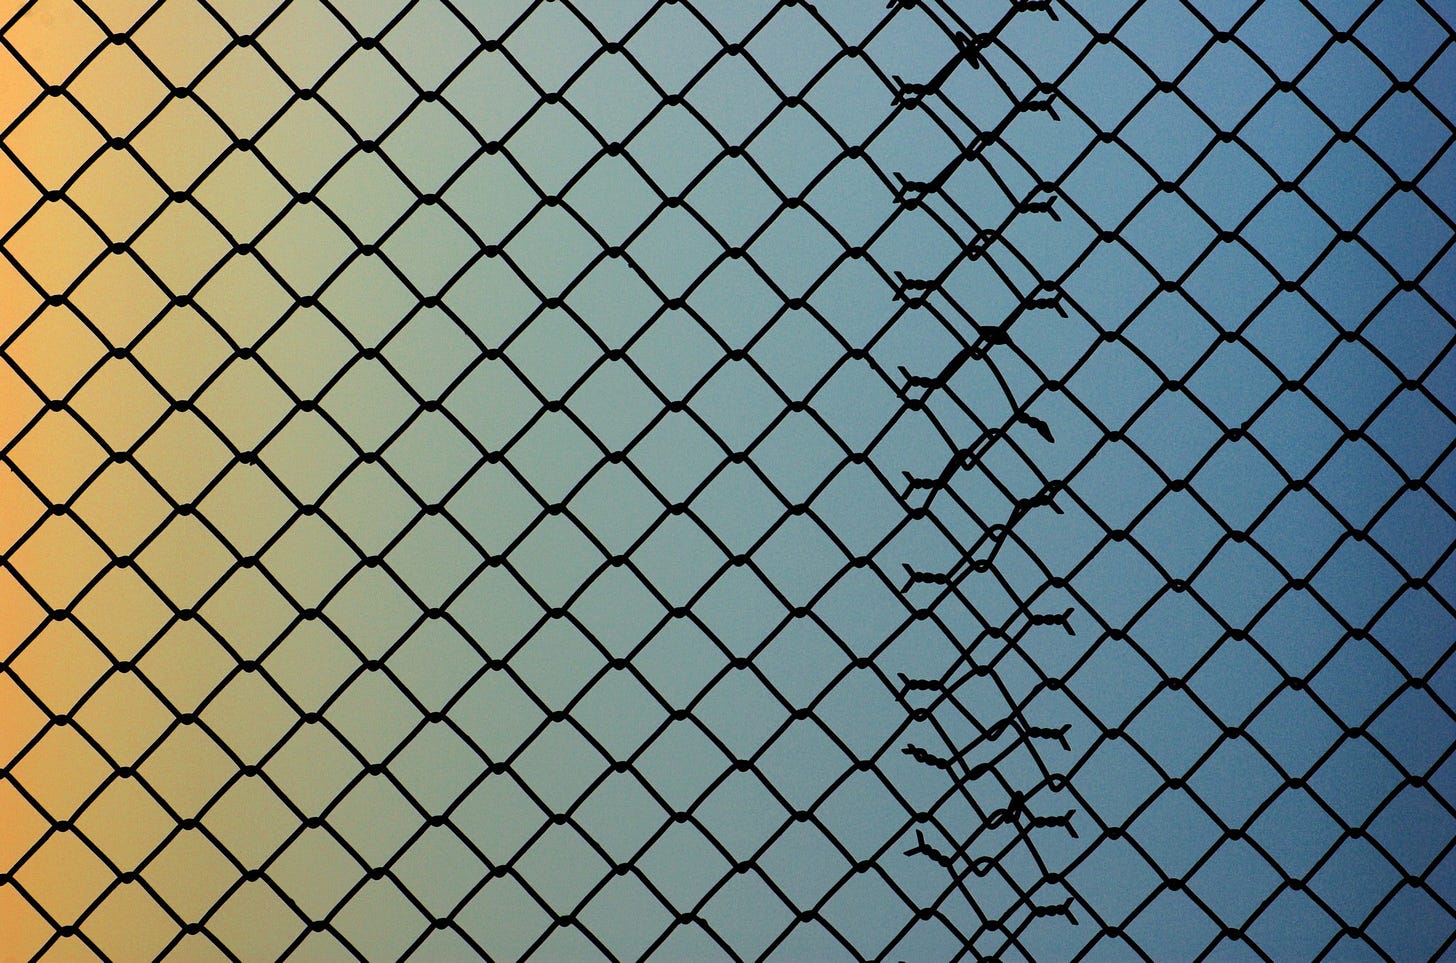 Overlapping chain link fences with a blue background gradient fading to yellow.